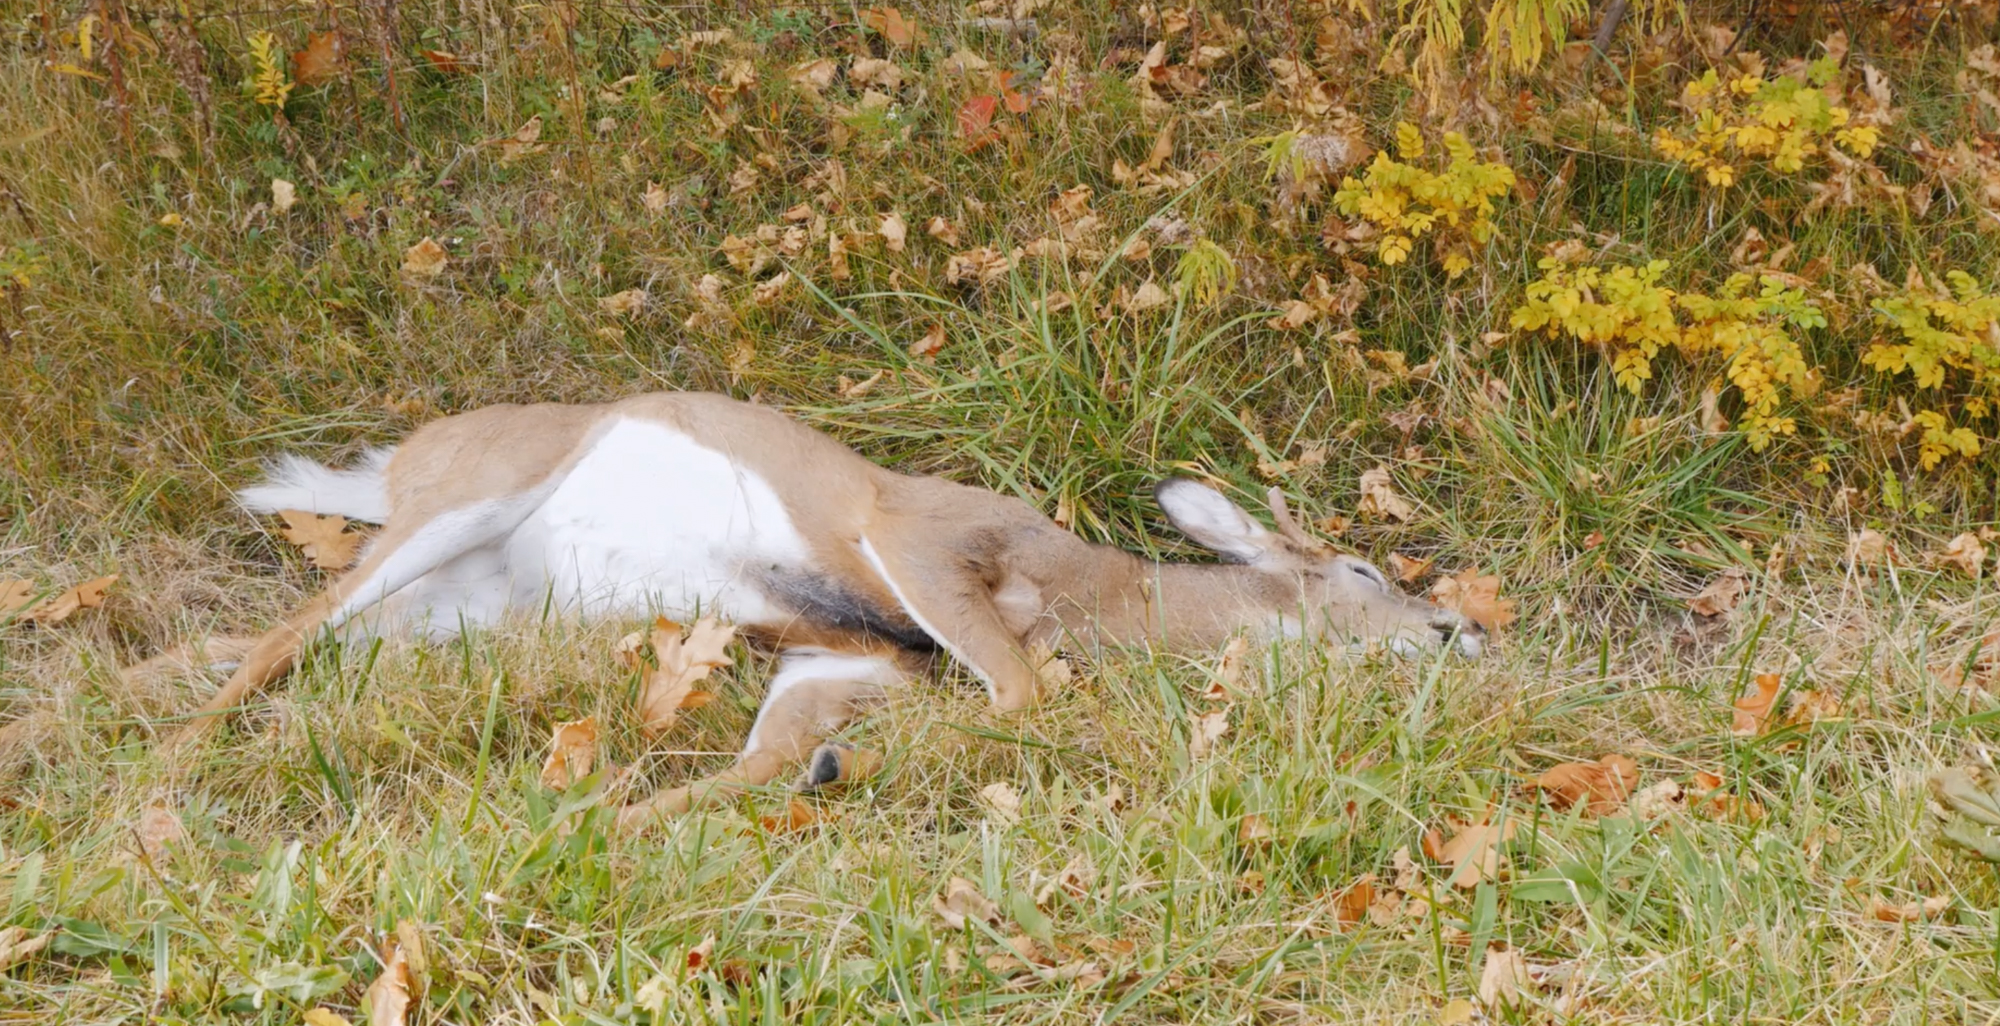 Six individuals have been busted for poaching more than 100 dead deer.